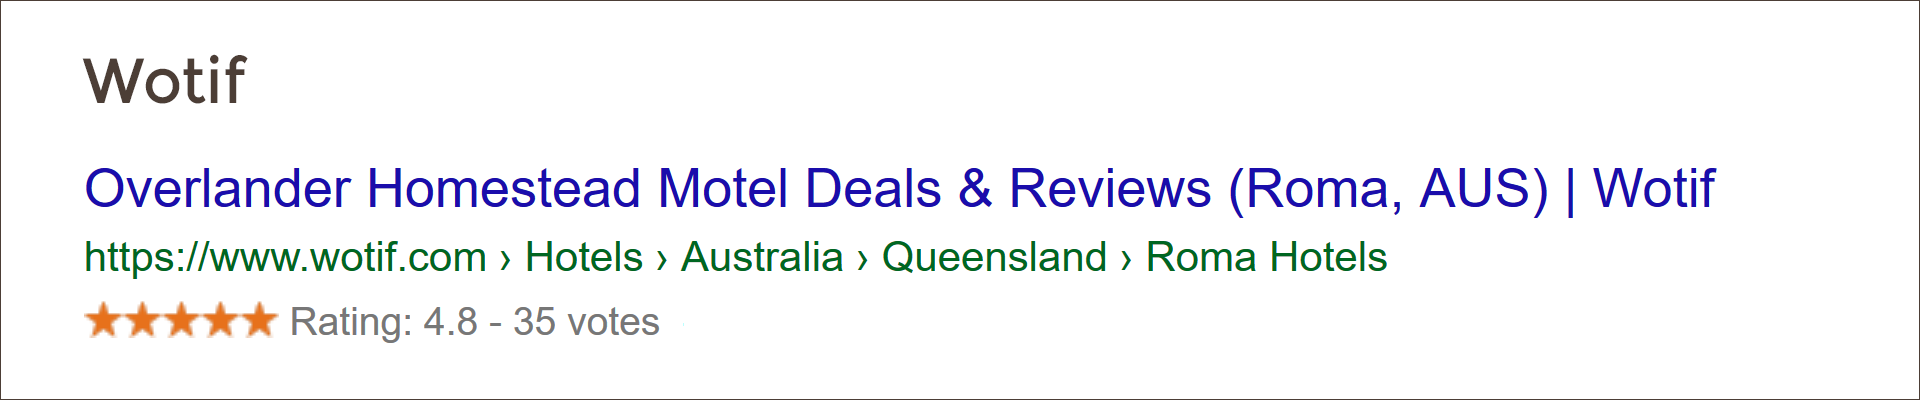 Wotif Reviews of The Overlander Homestead Motel Roma Queensland